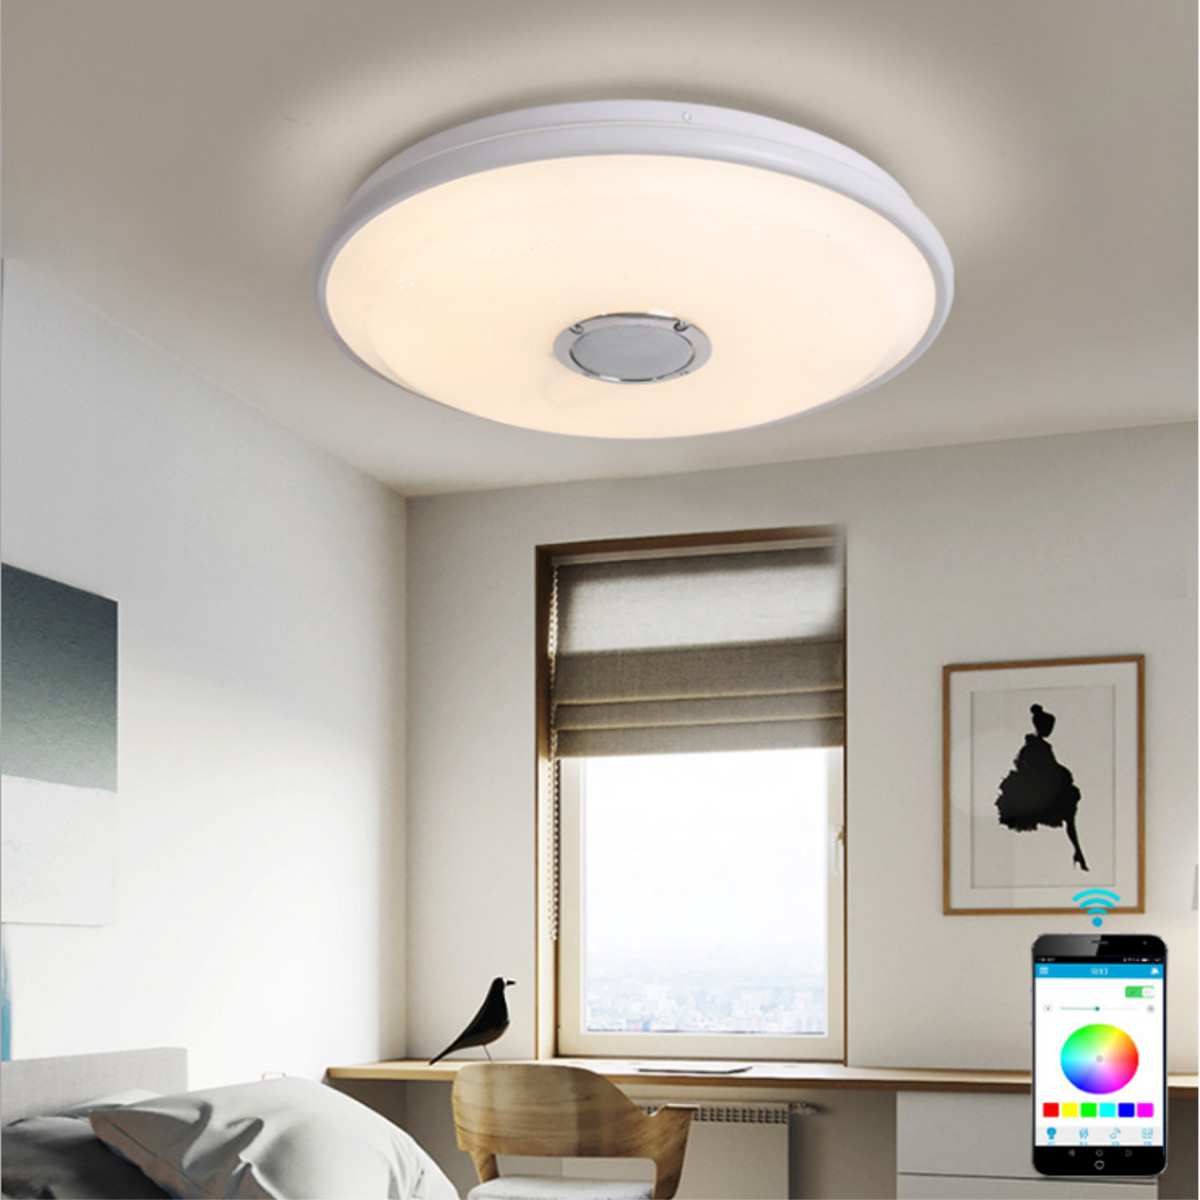 36-60W-LED-RGB-Music-Ceiling-Lamp-bluetooth-APPRemote-Control-Home-Bedroom-Lights-1697181-5